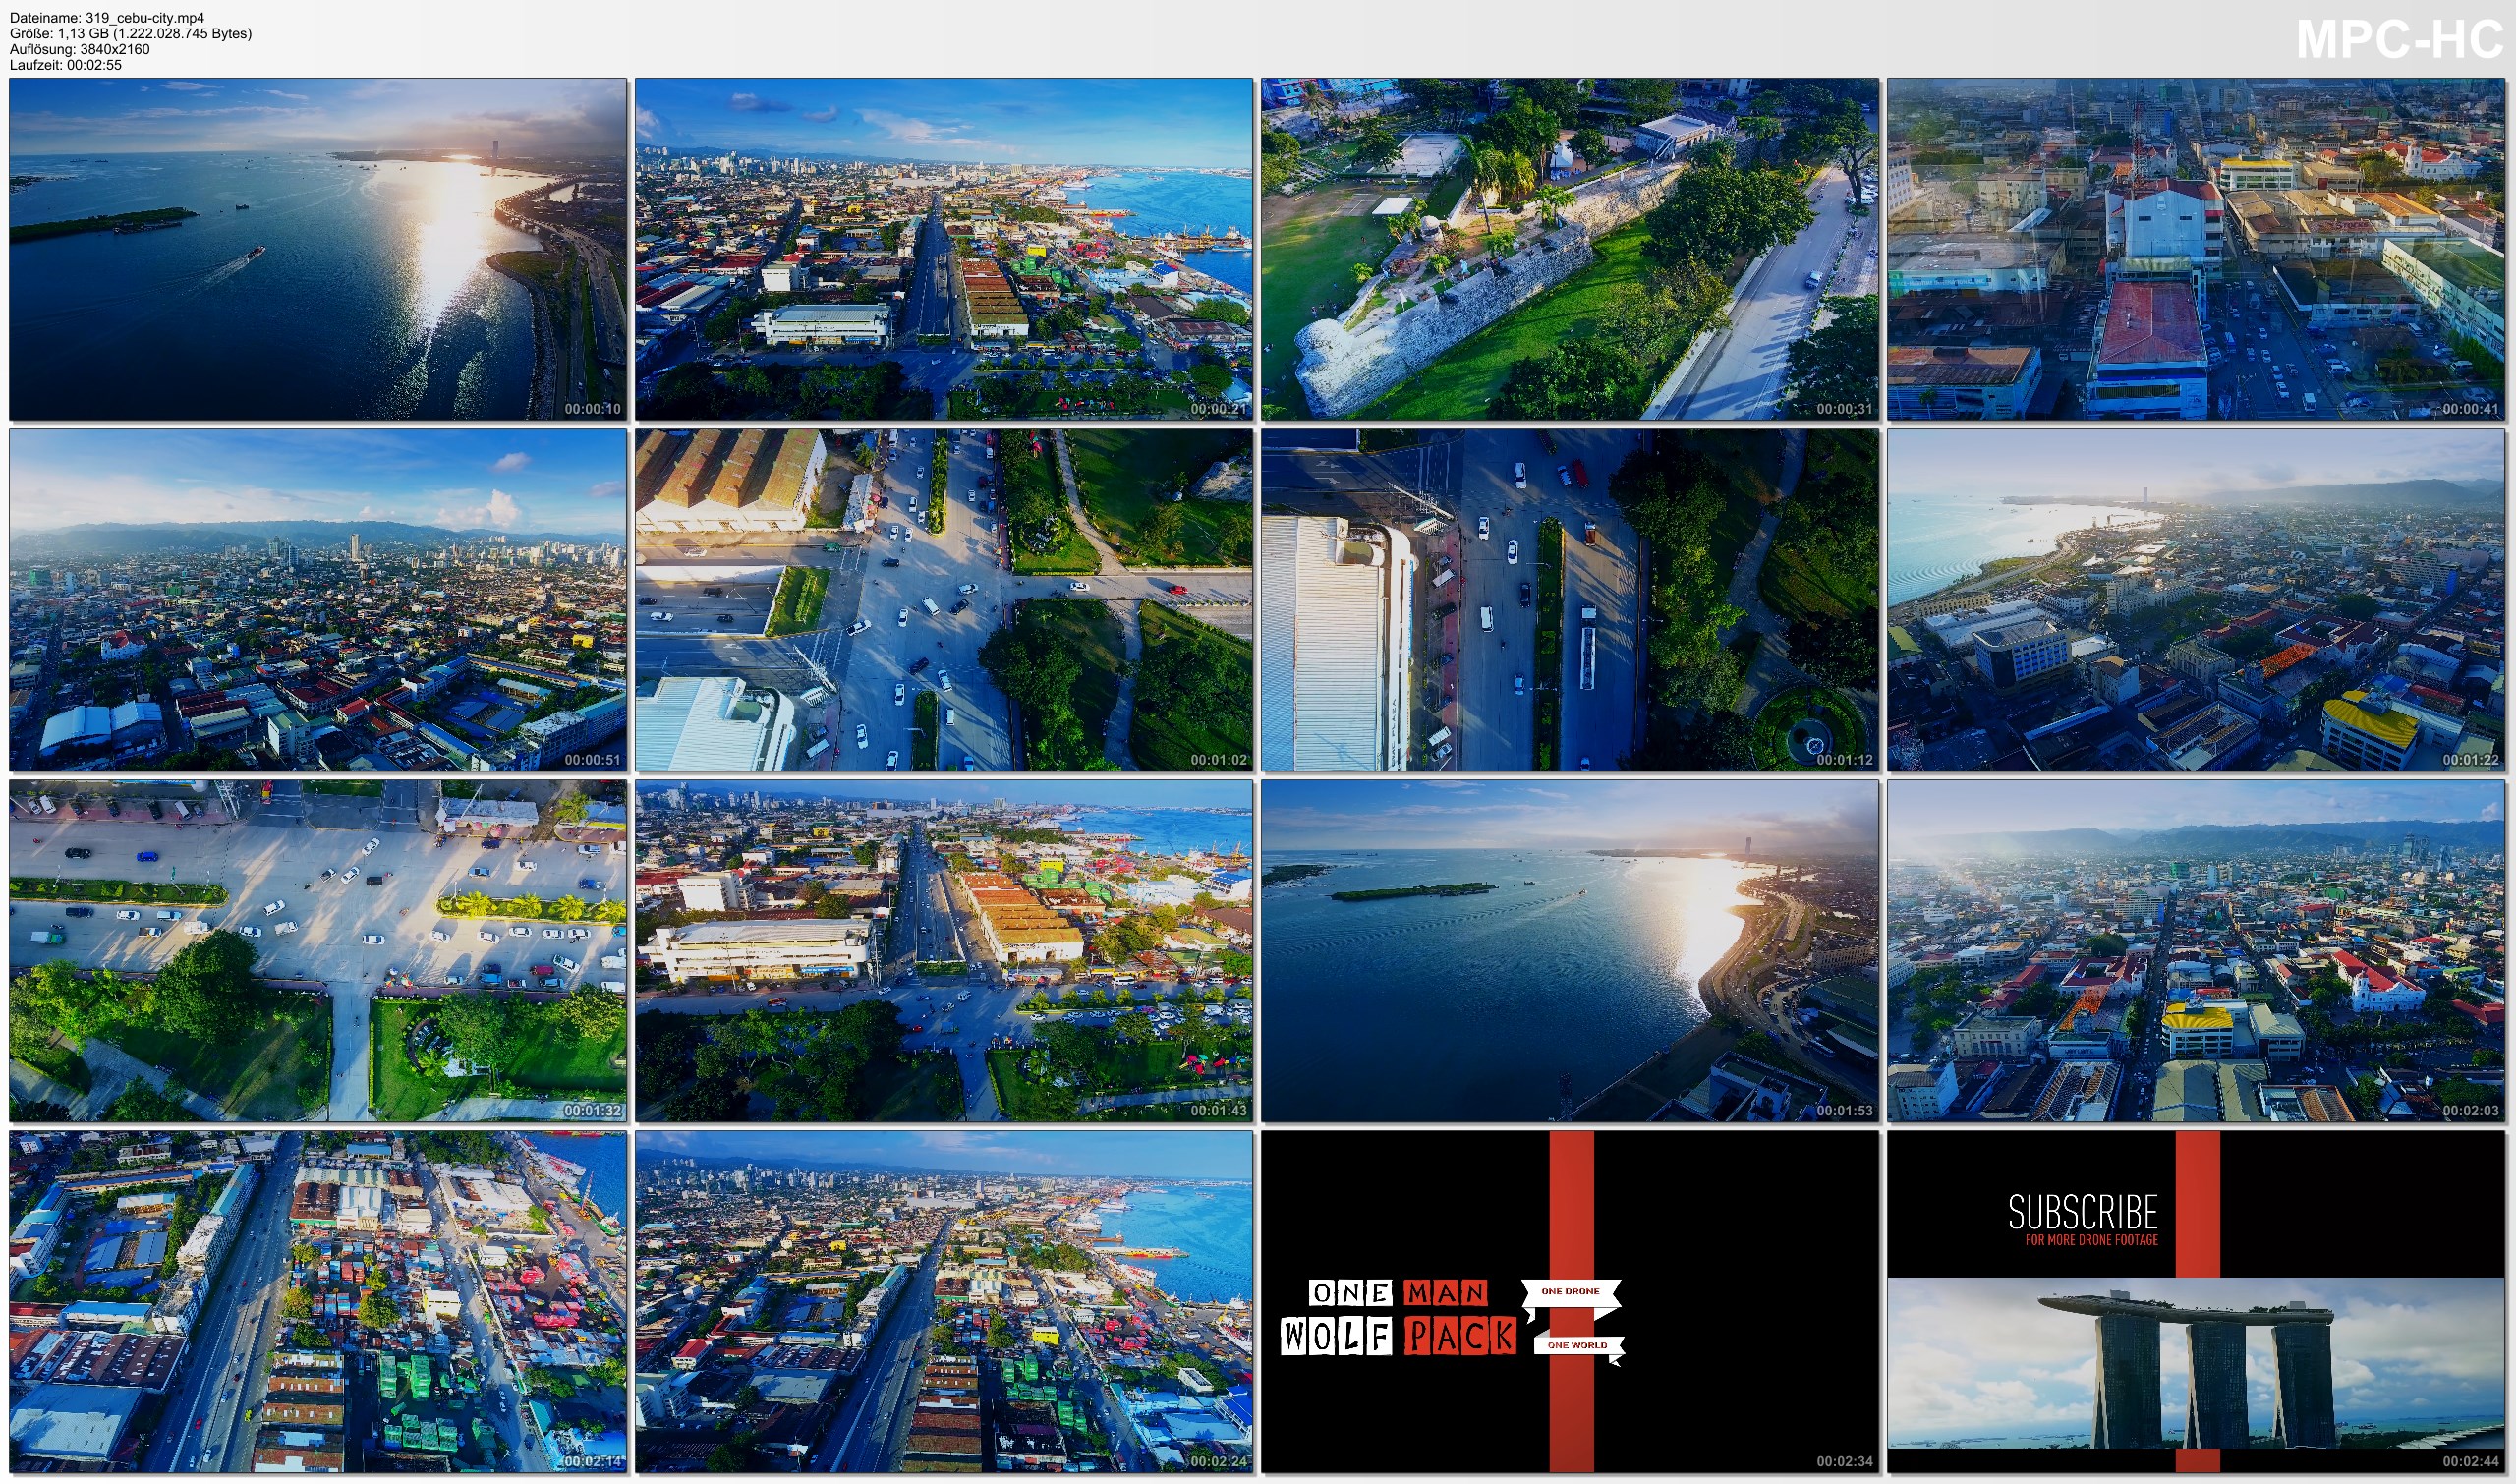 Drone Pictures from Video 【4K】Drone Footage | Cebu City - Philippines 2019 ..:: Cinematic Aerial Film